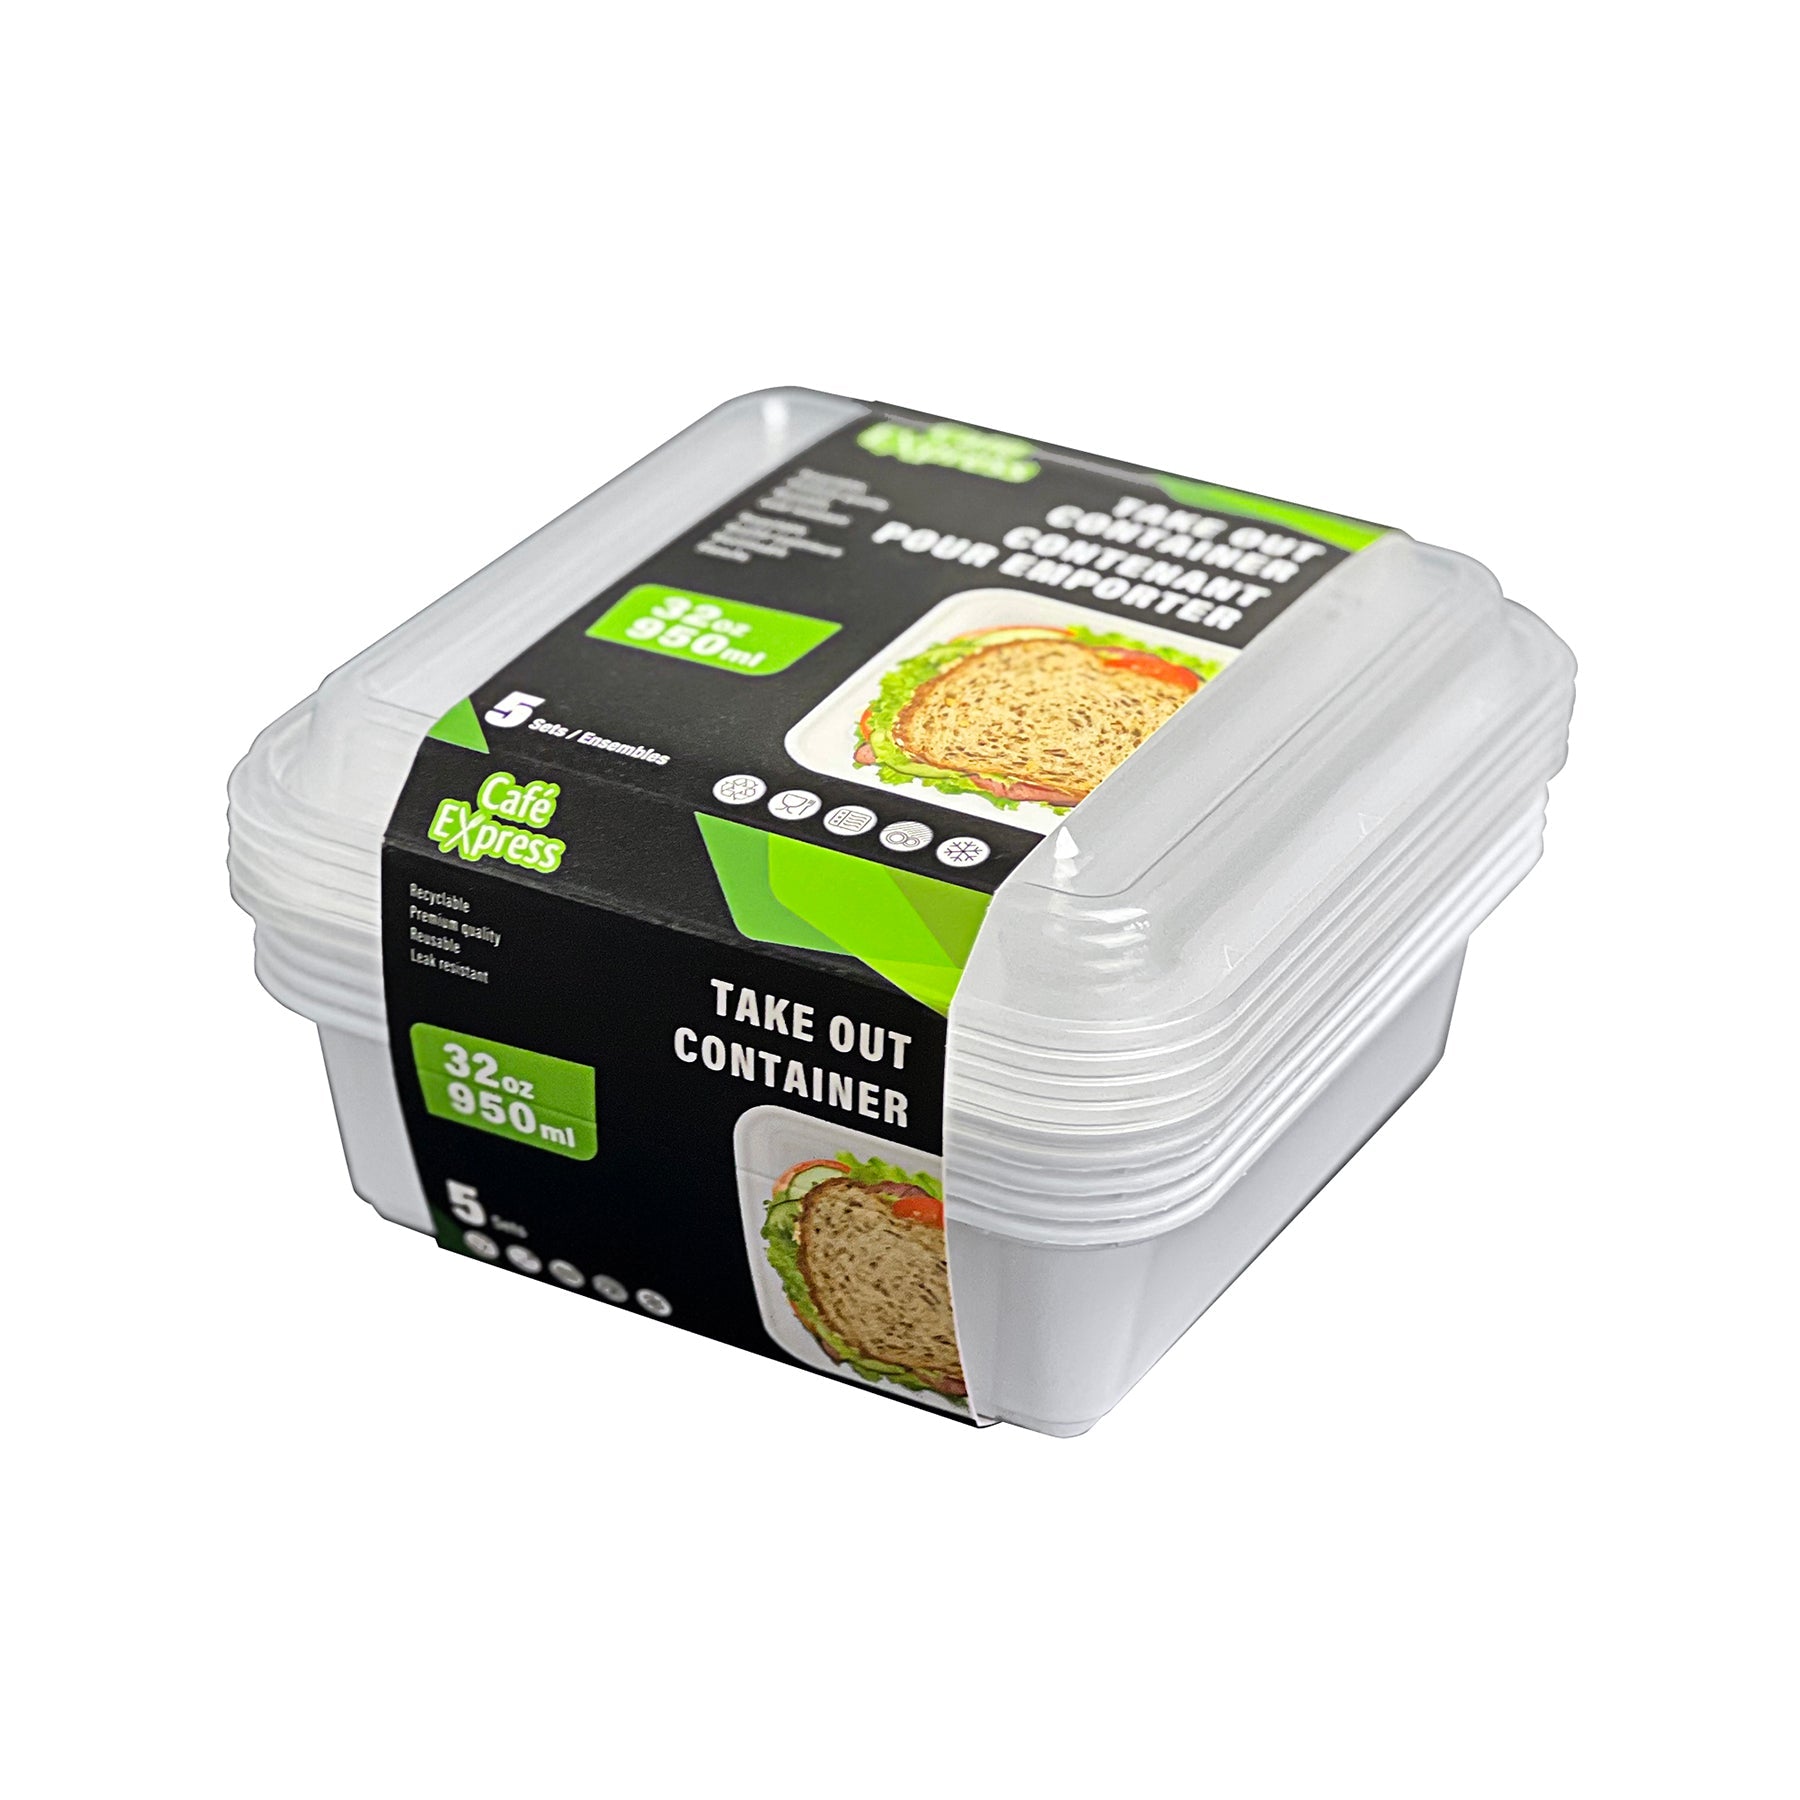 Café Express 5 Take Out Plastic Containers with Lid 32oz  5.8x5.8x2in